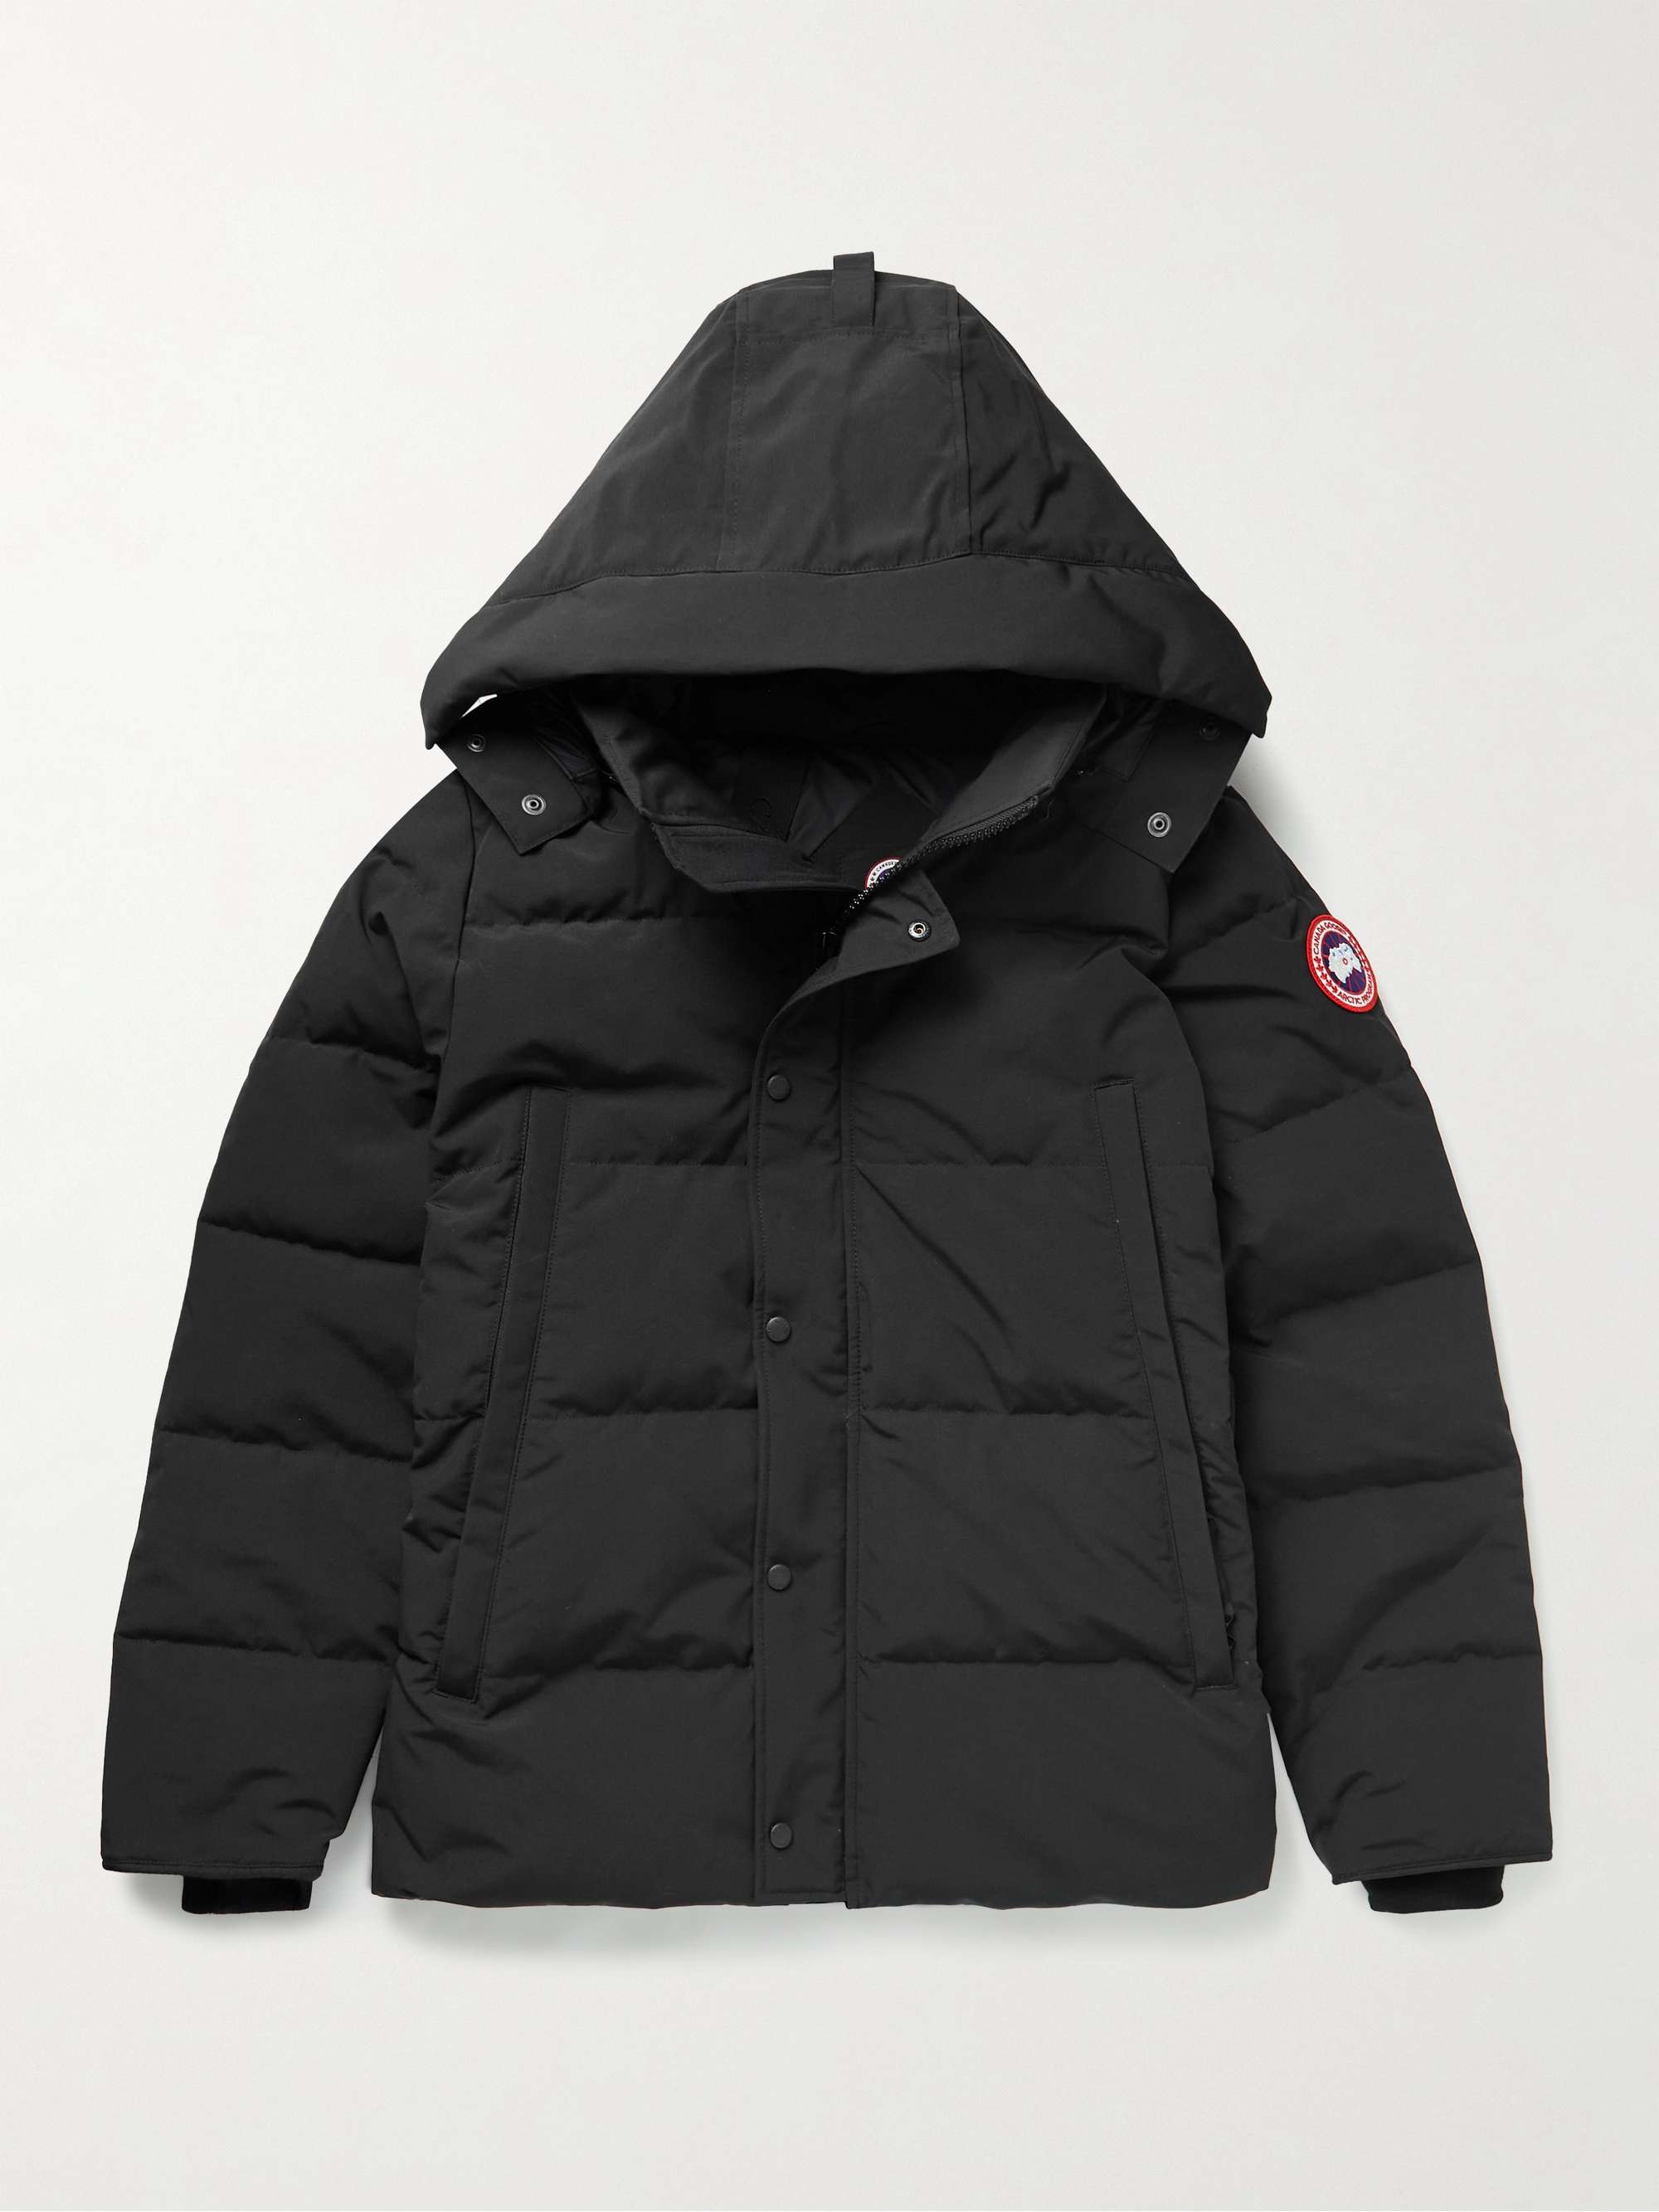 CANADA GOOSE Wyndham Arctic Tech® Hooded Down Parka | ミスターポーター